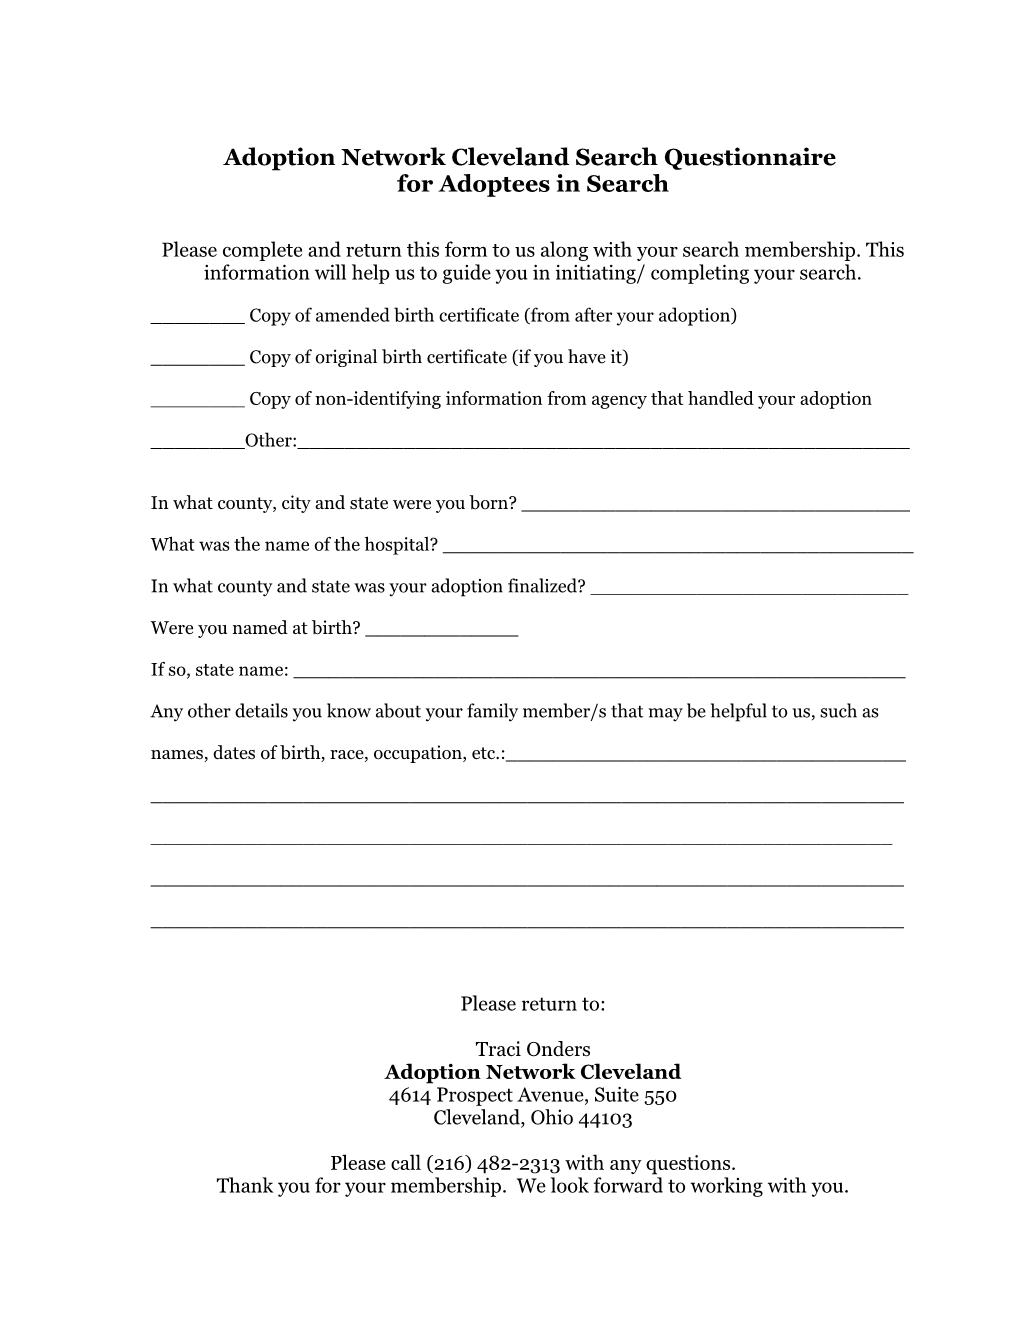 Please Complete and Return This Form to Us Along with Your Search Membership